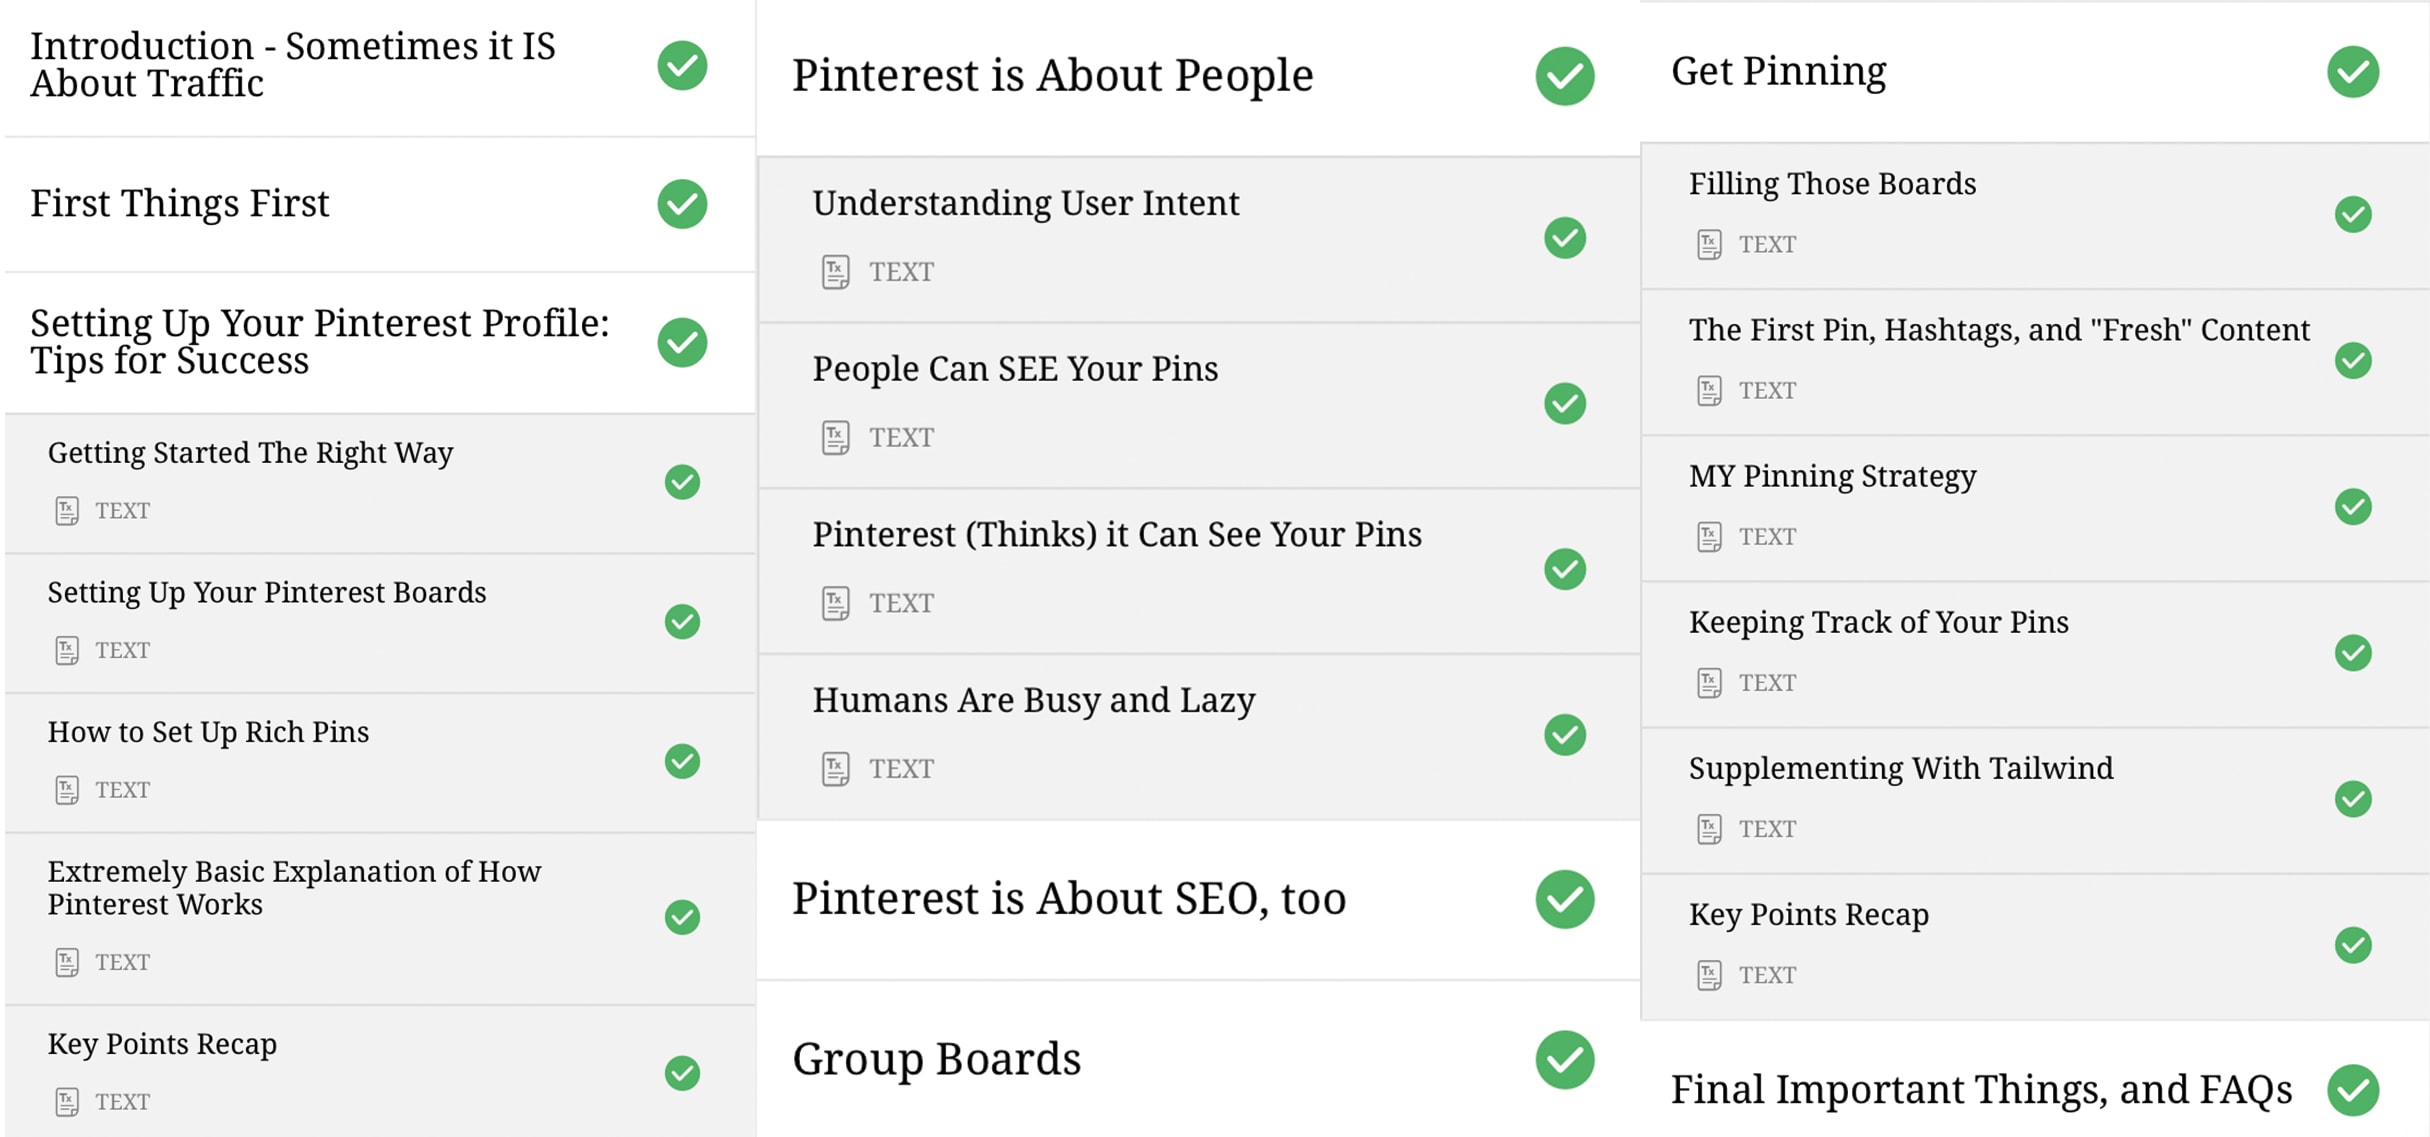 Pinteresting Strategies Review - The best value Pinterest course out there. Here are my results #pinterest #trafficgrowth #pinterestcourse